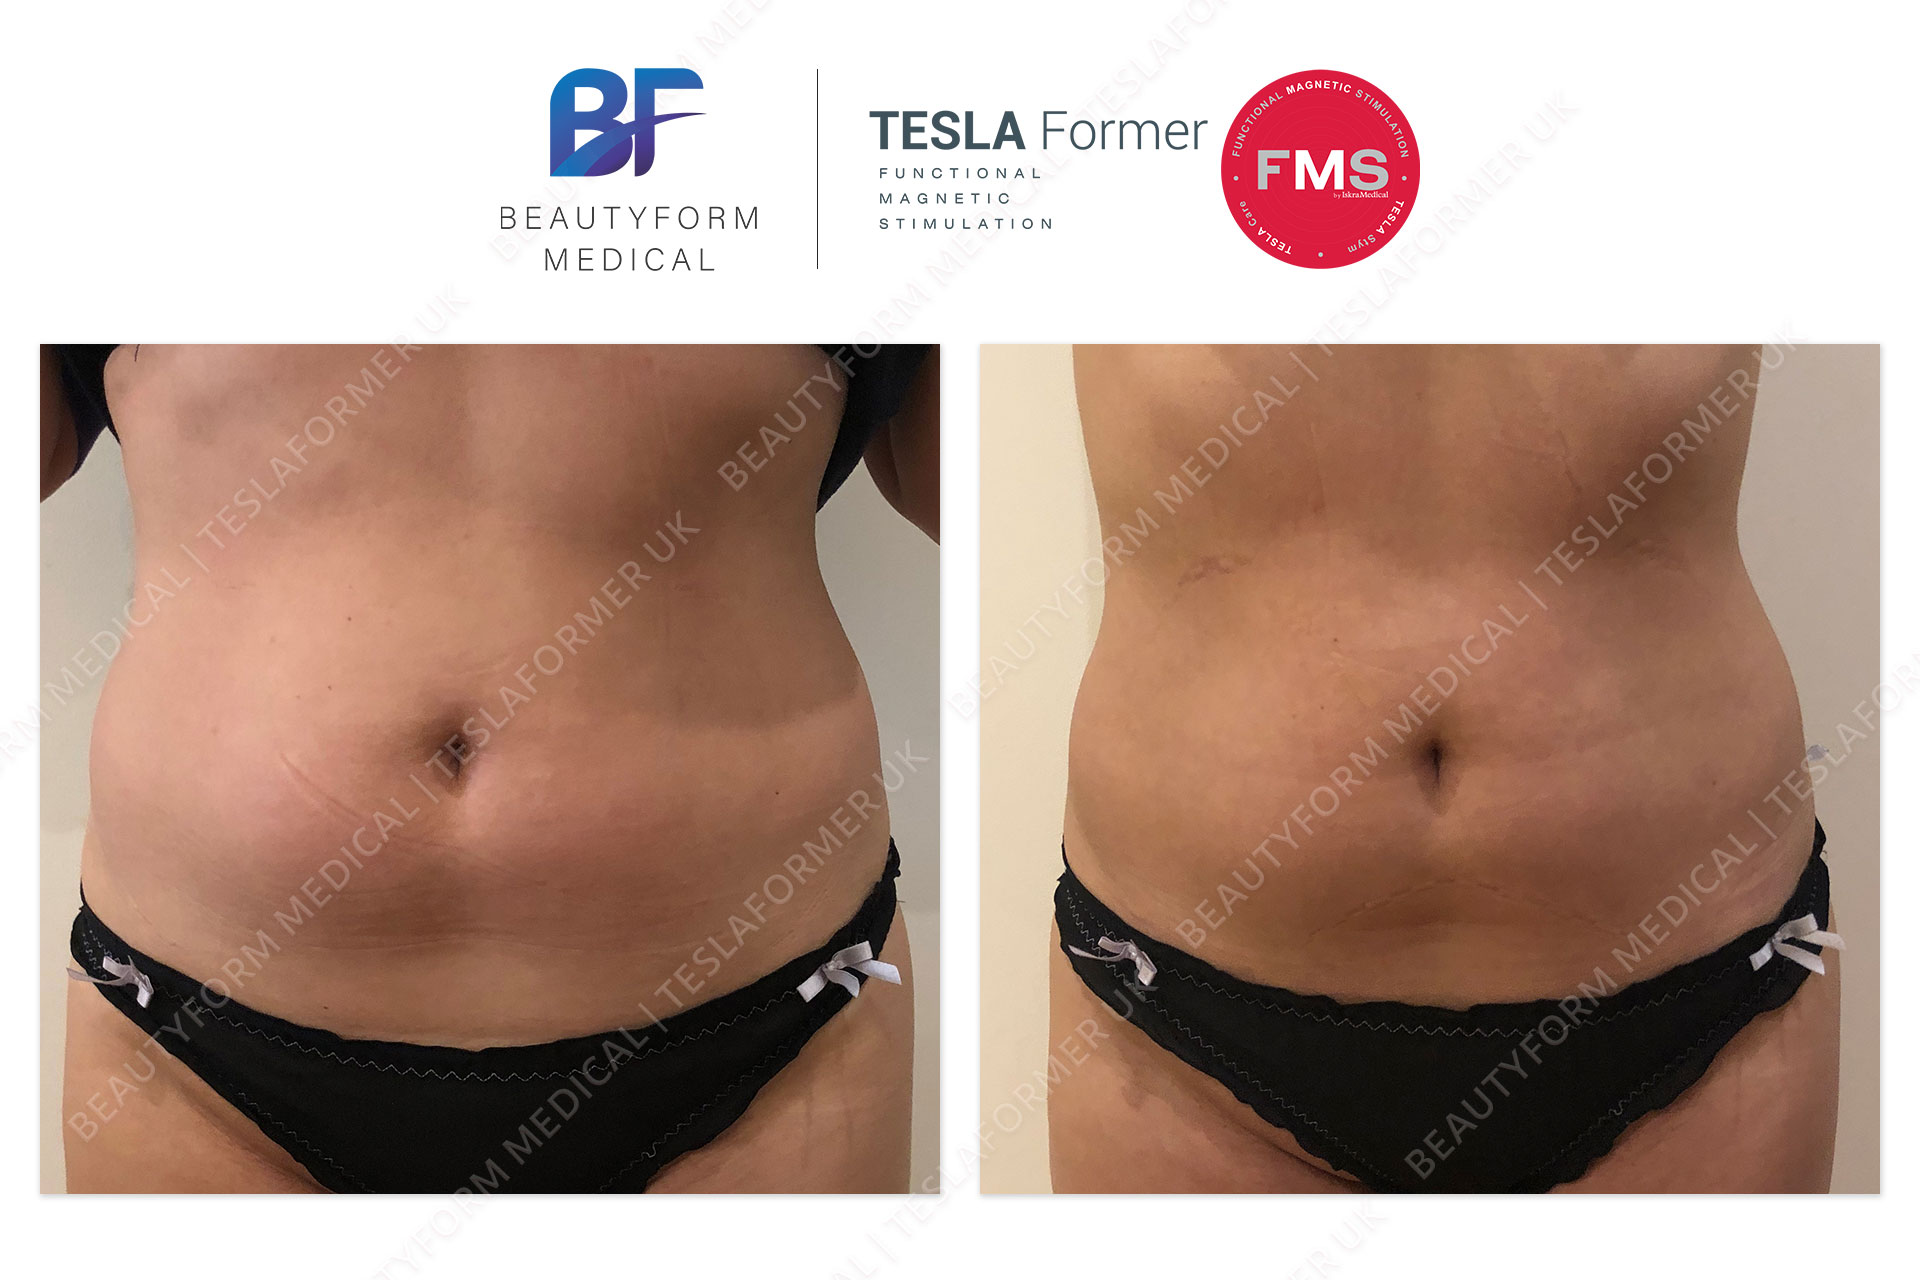 Tesla Former Abs before and after Muscle Stimulation